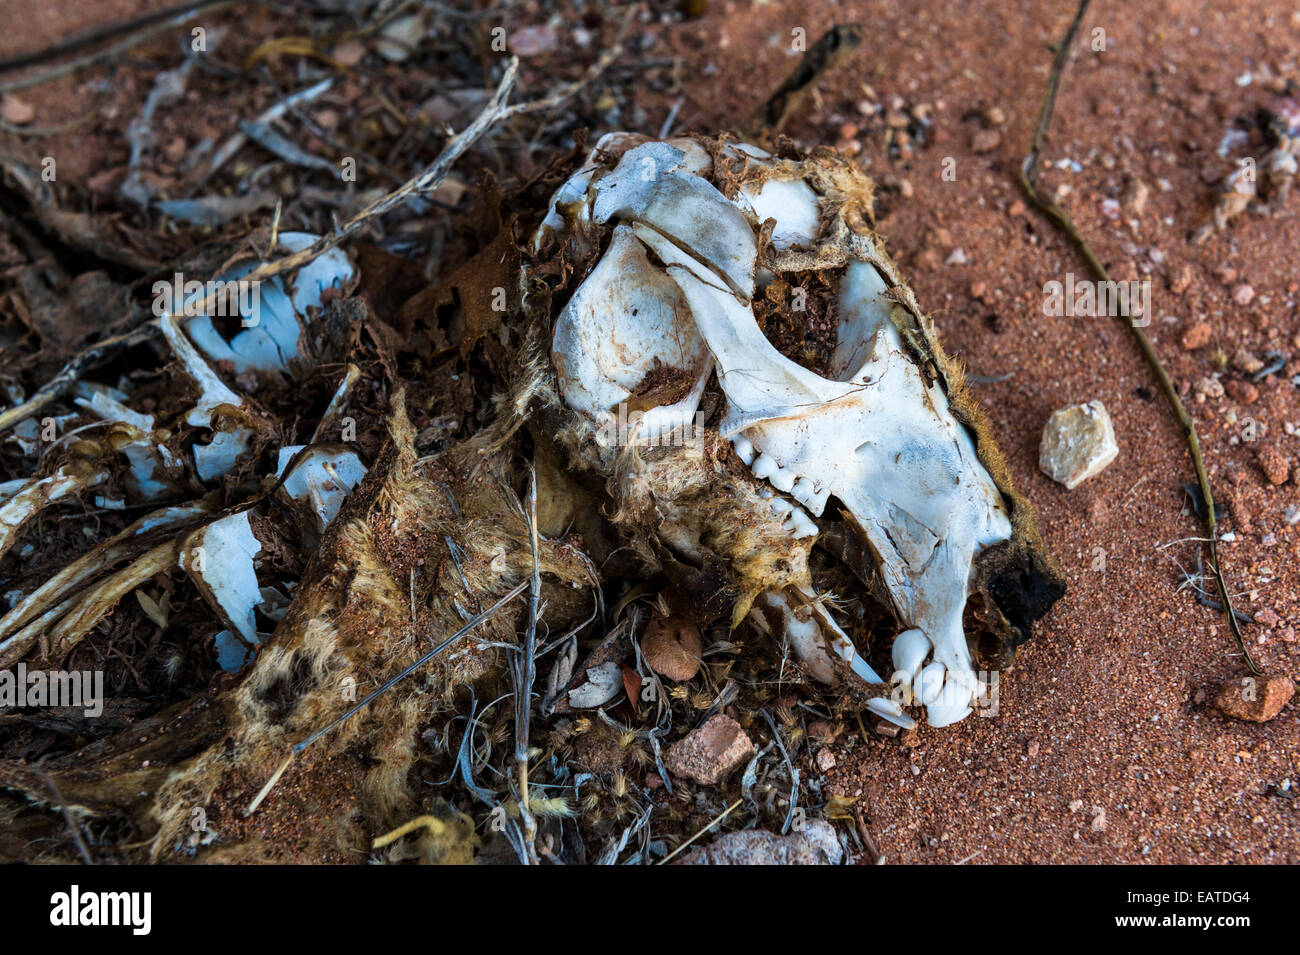 The skull and rotting fur of a dead kangaroo by a desert road. Stock Photo